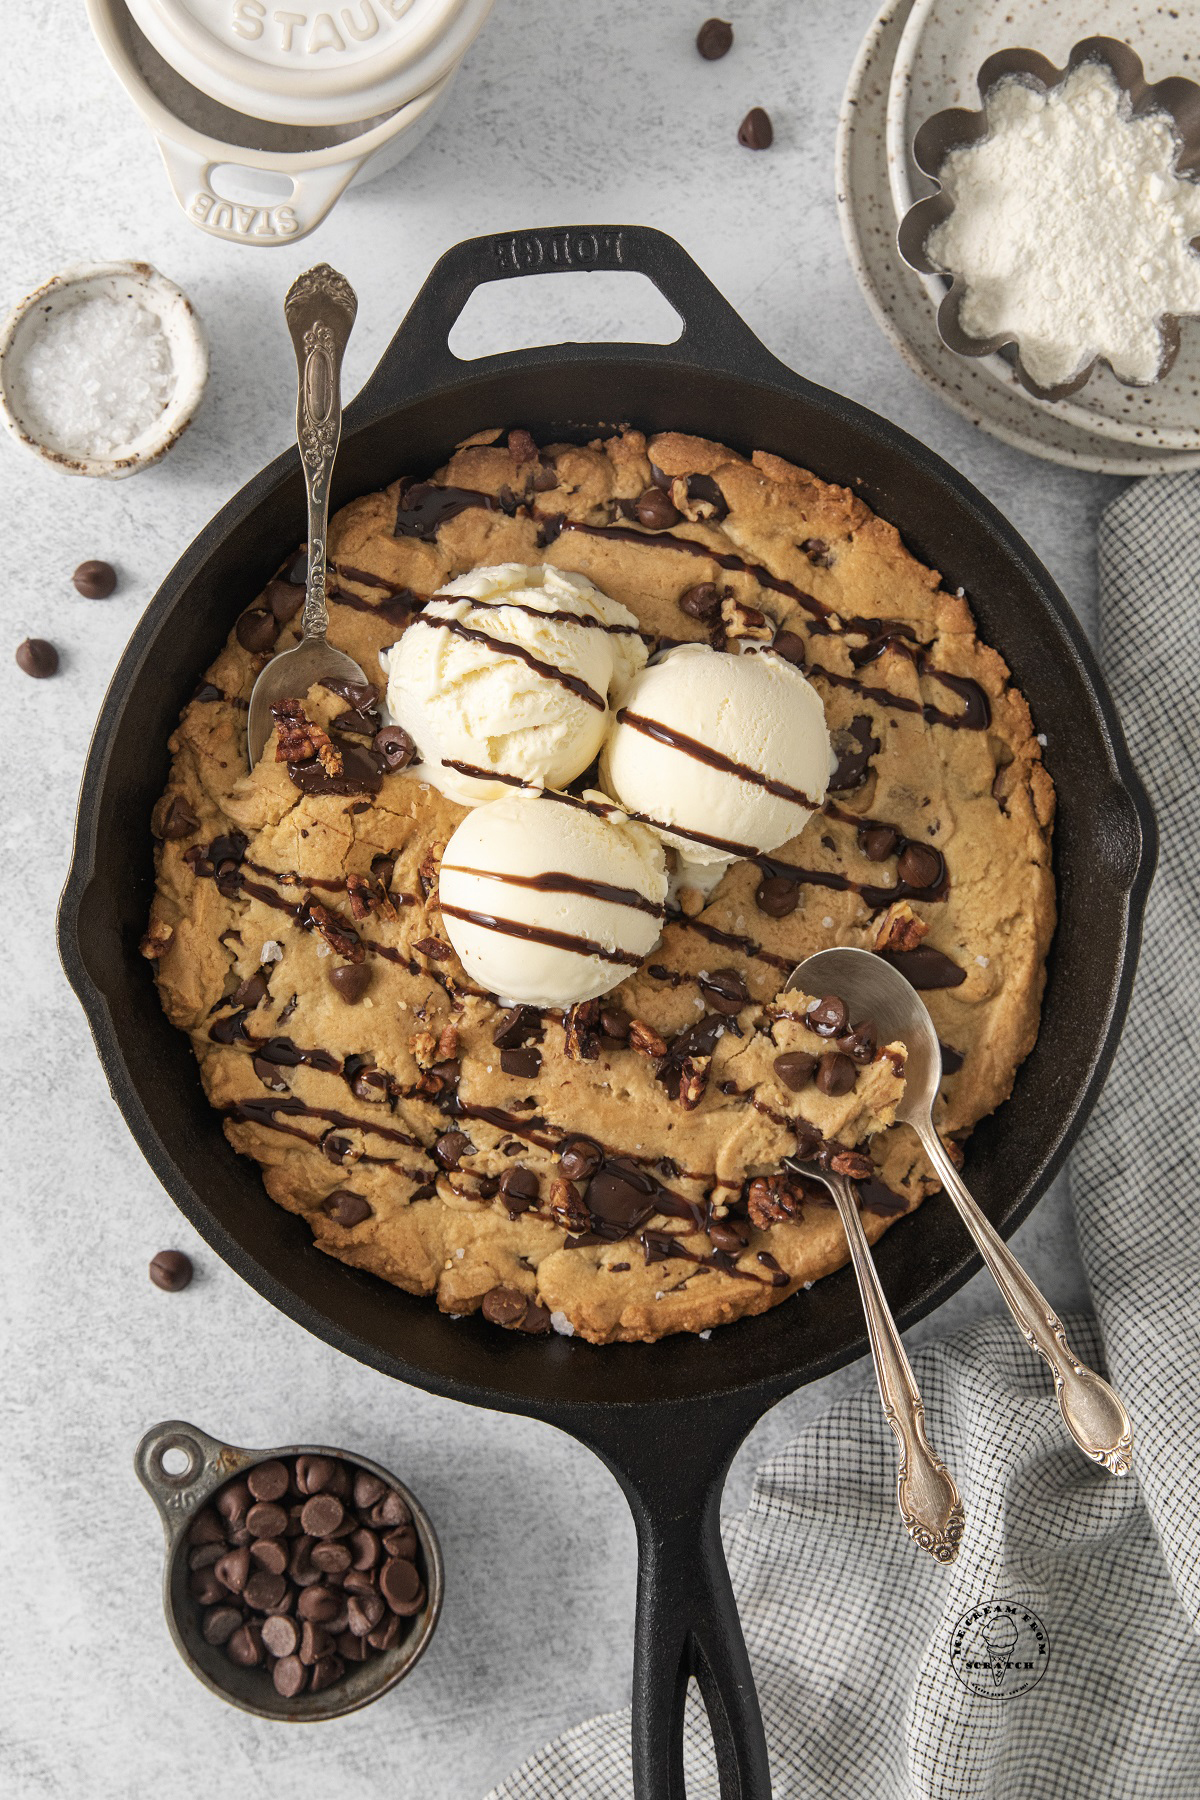 A giant cookie (pazookie) in a cast iron pan topped with scoops of ice cream. Three spoons are digging in.